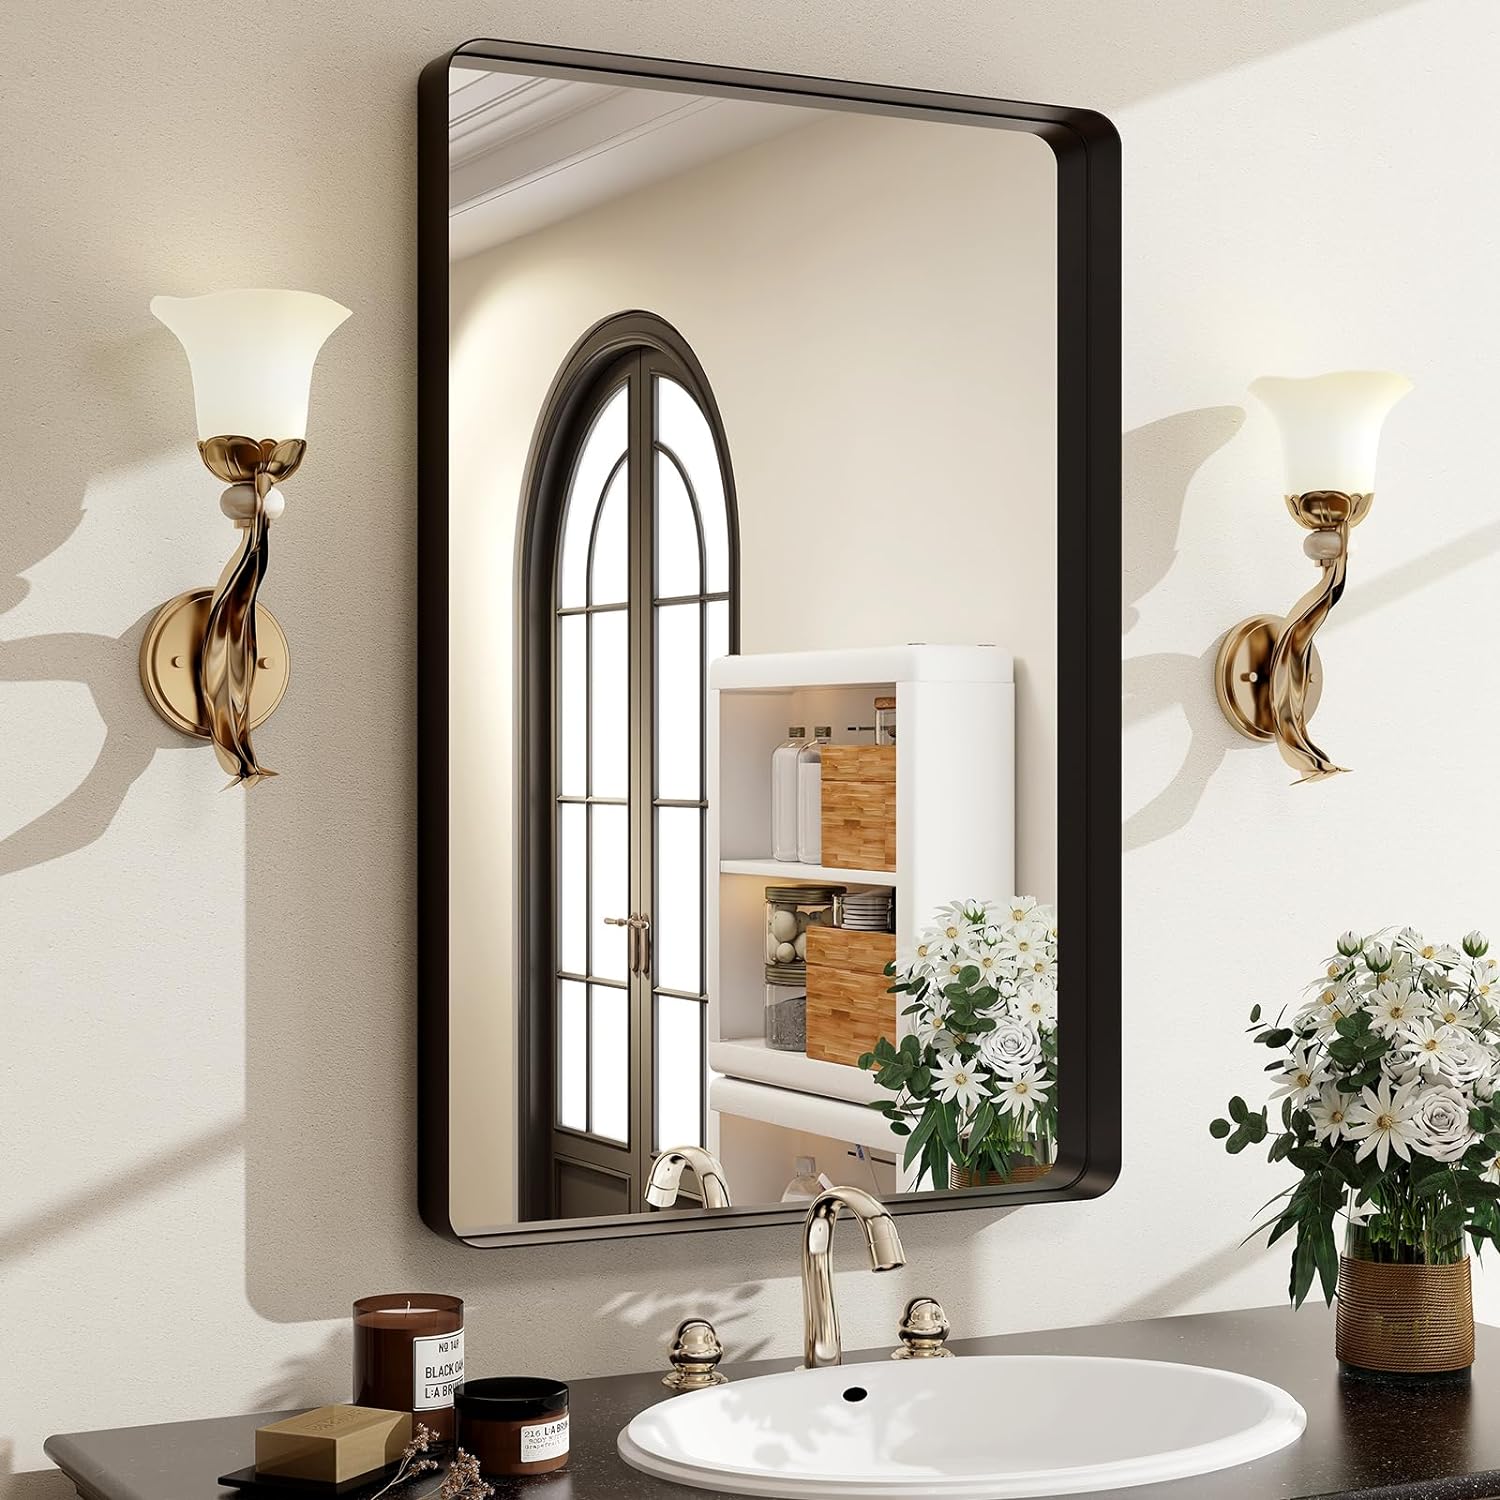 I absolutely love this mirror. I got this one first to look over and make sure it would work in the space. It will be perfect over my son' bathroom vanity. I paid for a second one to go over my daughter' vanity. It can be hung vertical or horizontal. I like the way they have the hanging bracket. You'll screw in the sturdy metal piece then you'll slide the mirror across it. Easy to hang. We are building right now so we were able to add extra blocking support in the wall for this. The bracket is